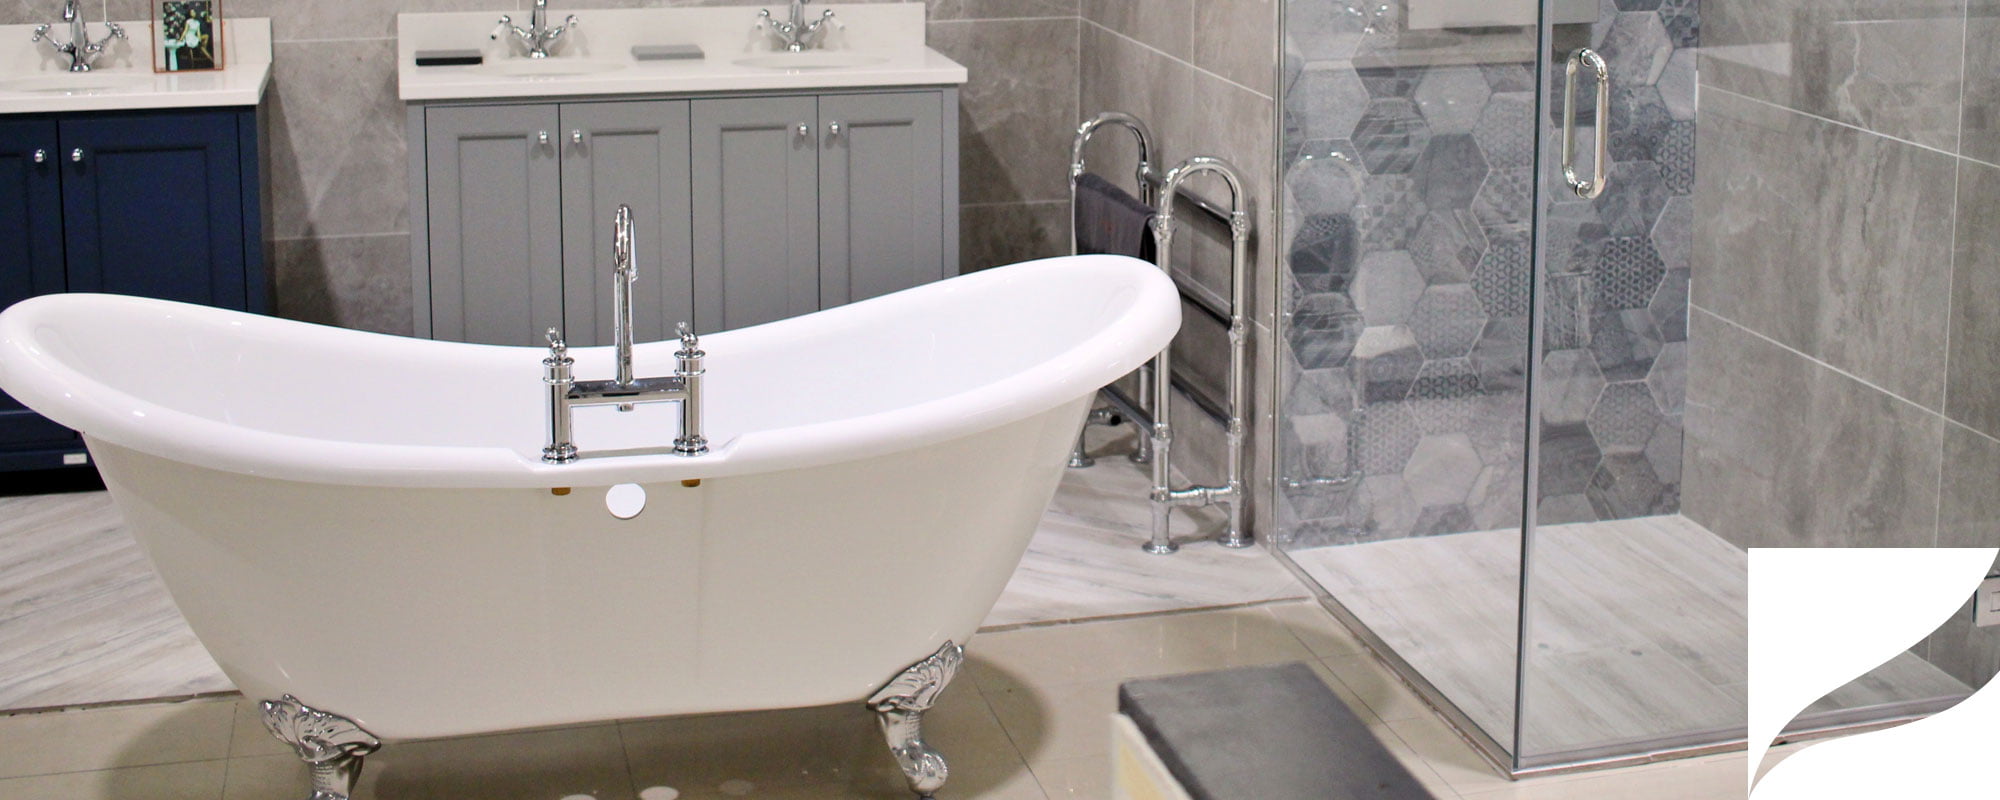 Top-rated bathroom fitter in Kildare